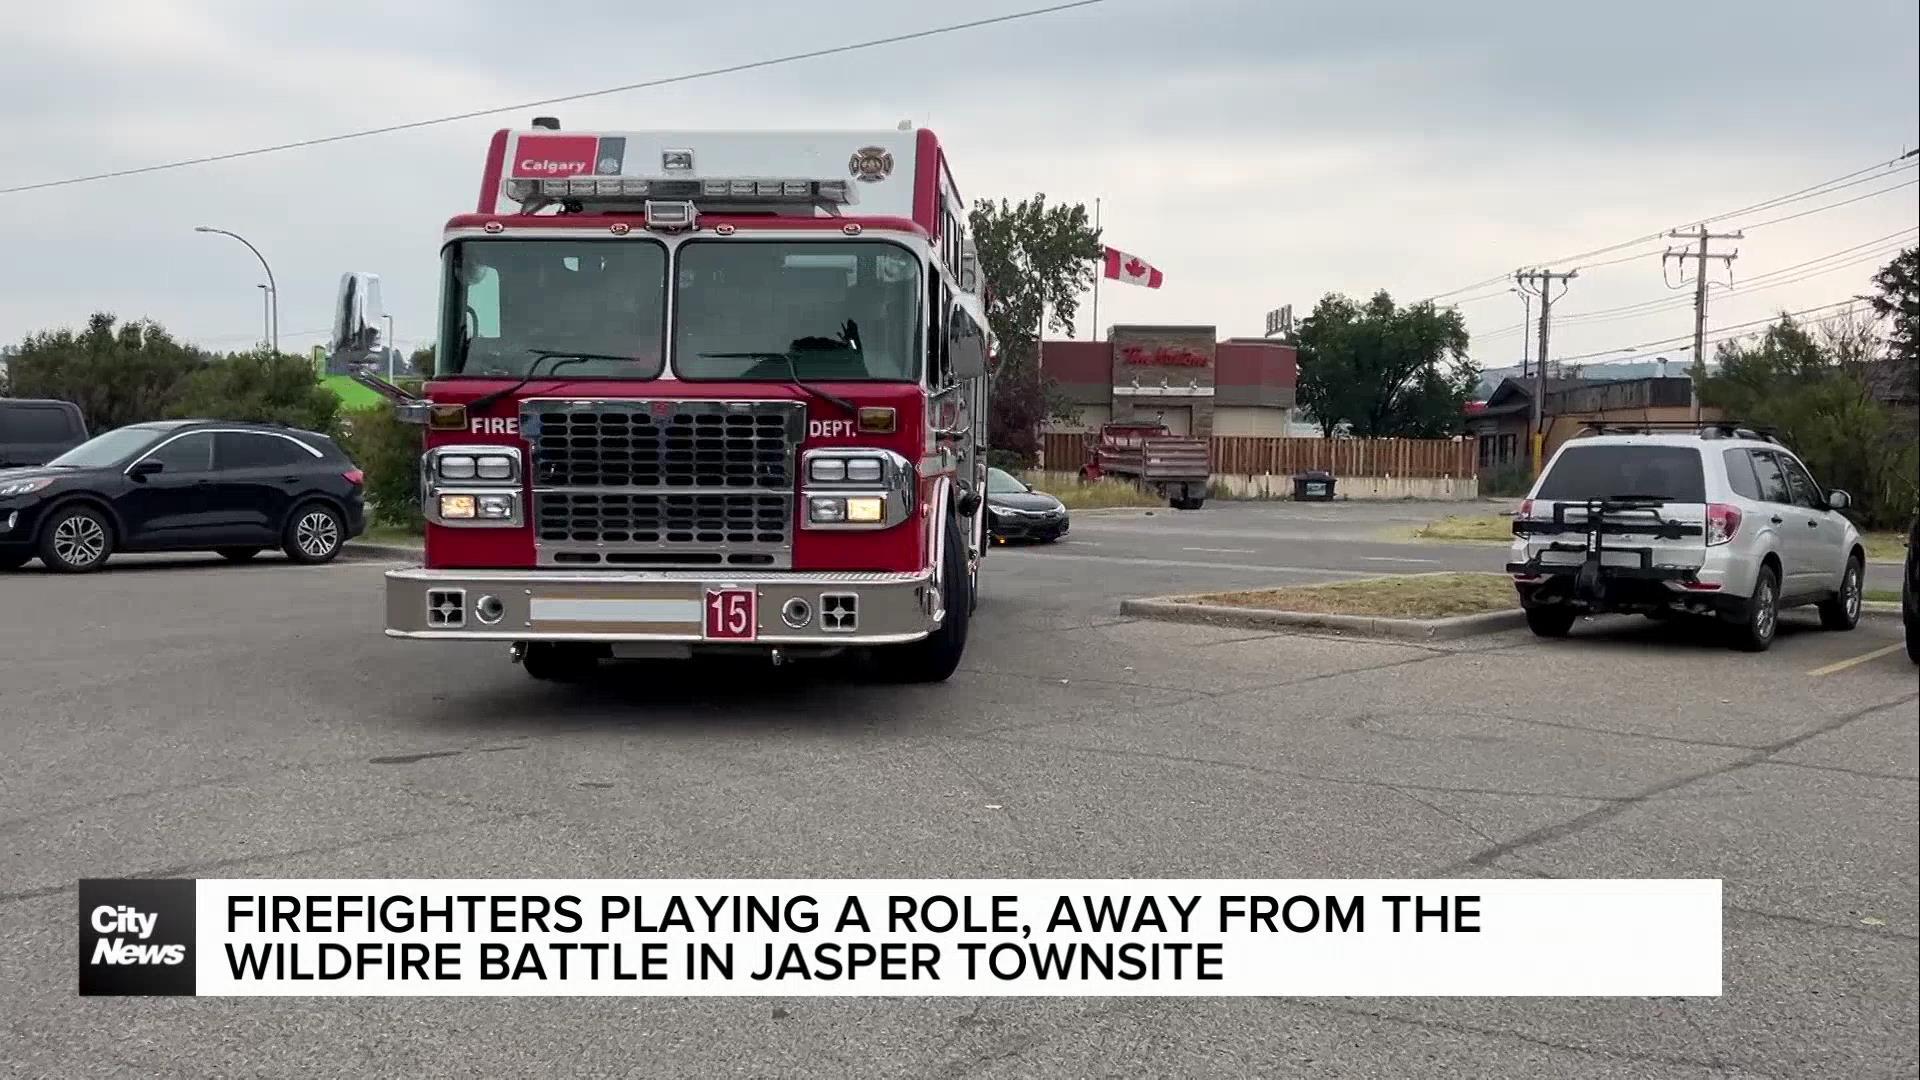 Firefighters playing a role, away from the wildfire battle in Jasper townsite